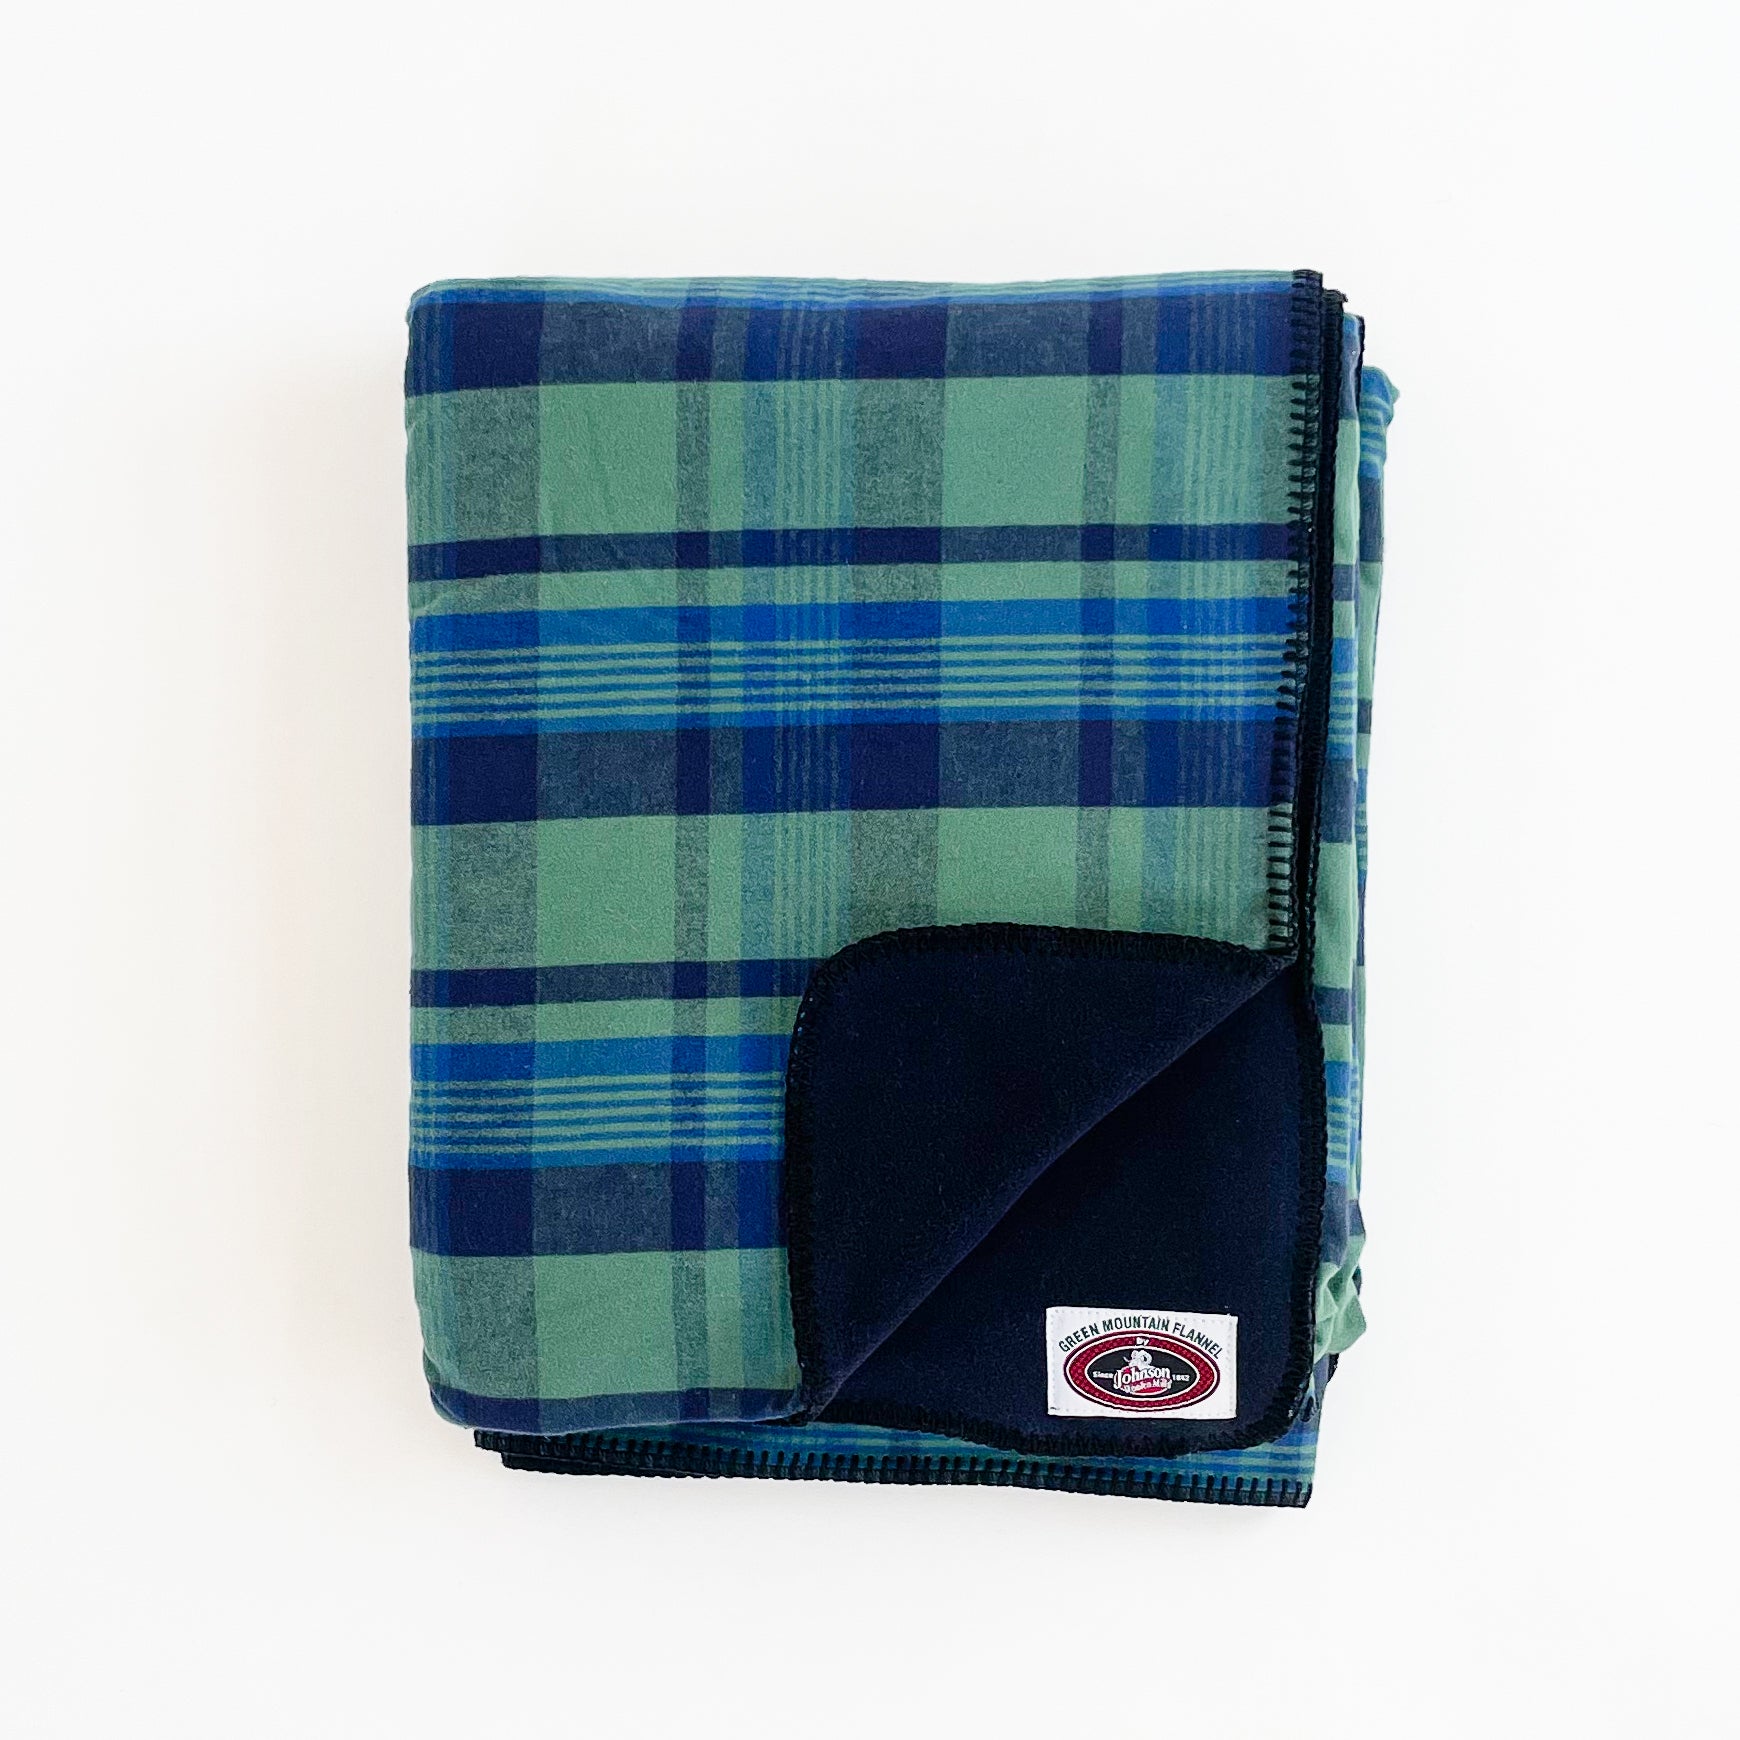 Green Mountain Flannel Throw Royal Navy & Green stripes with black fleece lining open corner view